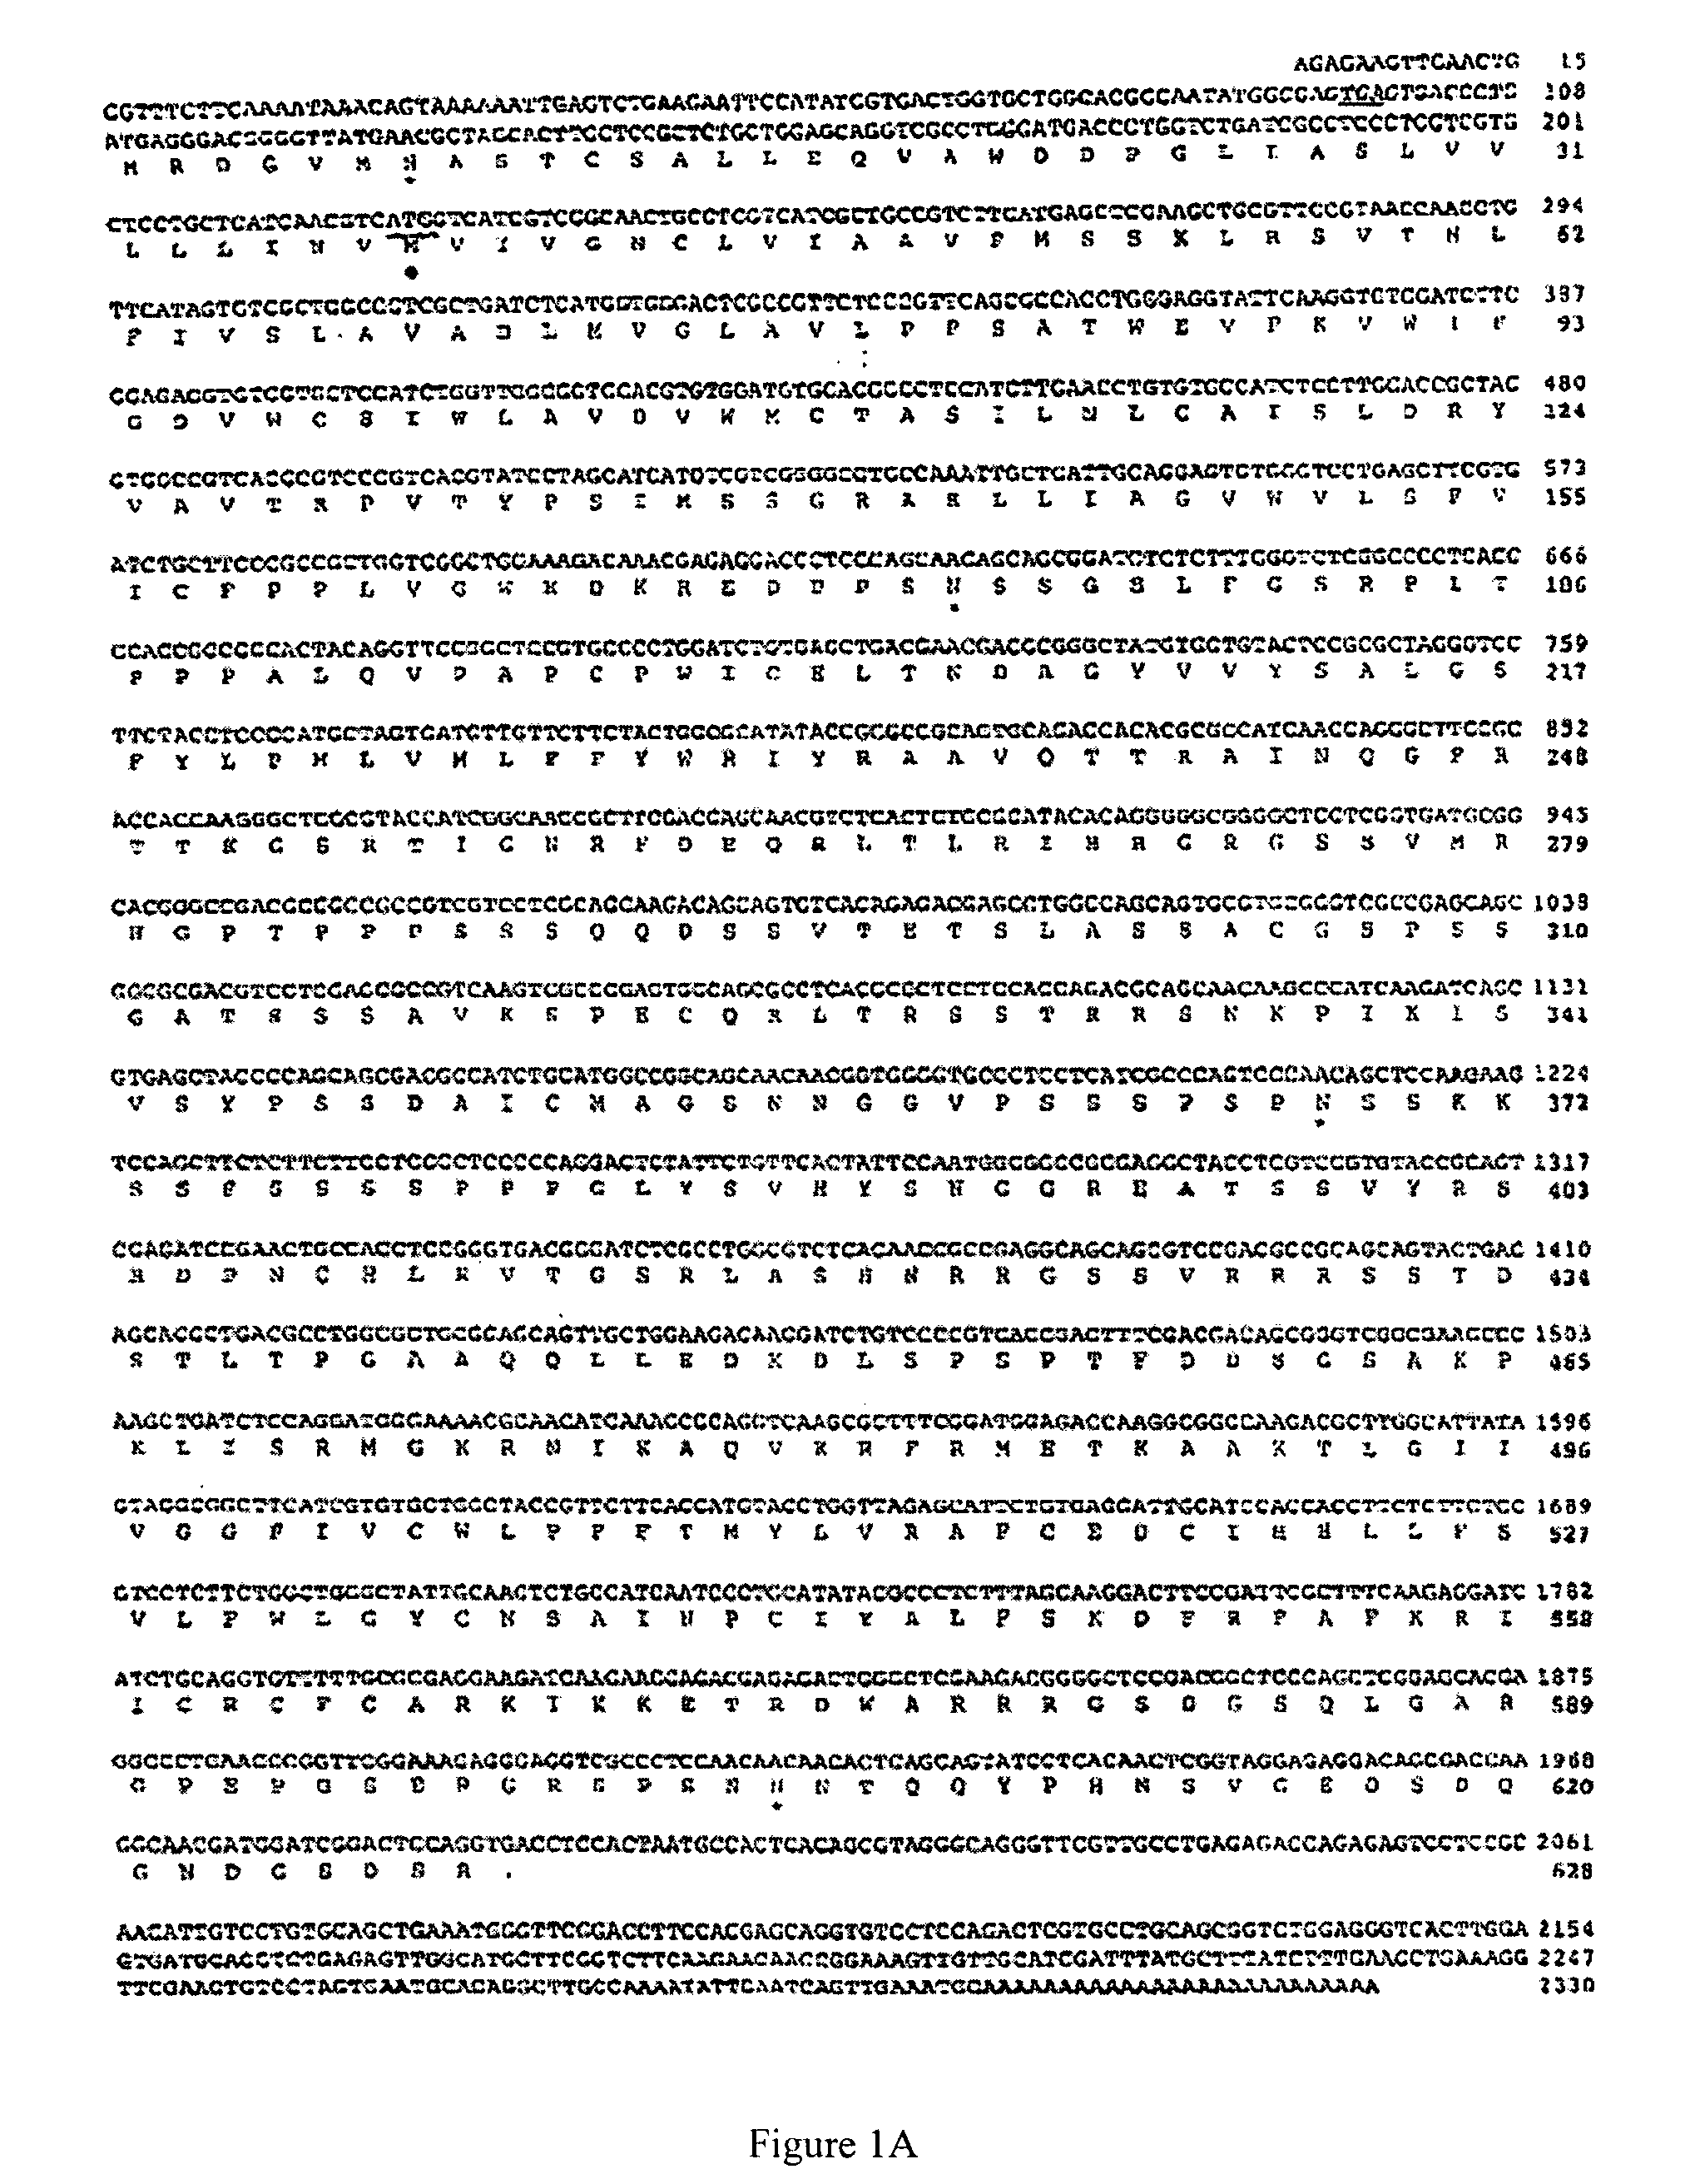 Methods of screening tyramine- and octopamine-expressing cells for compounds and compositions having potential insect control activity